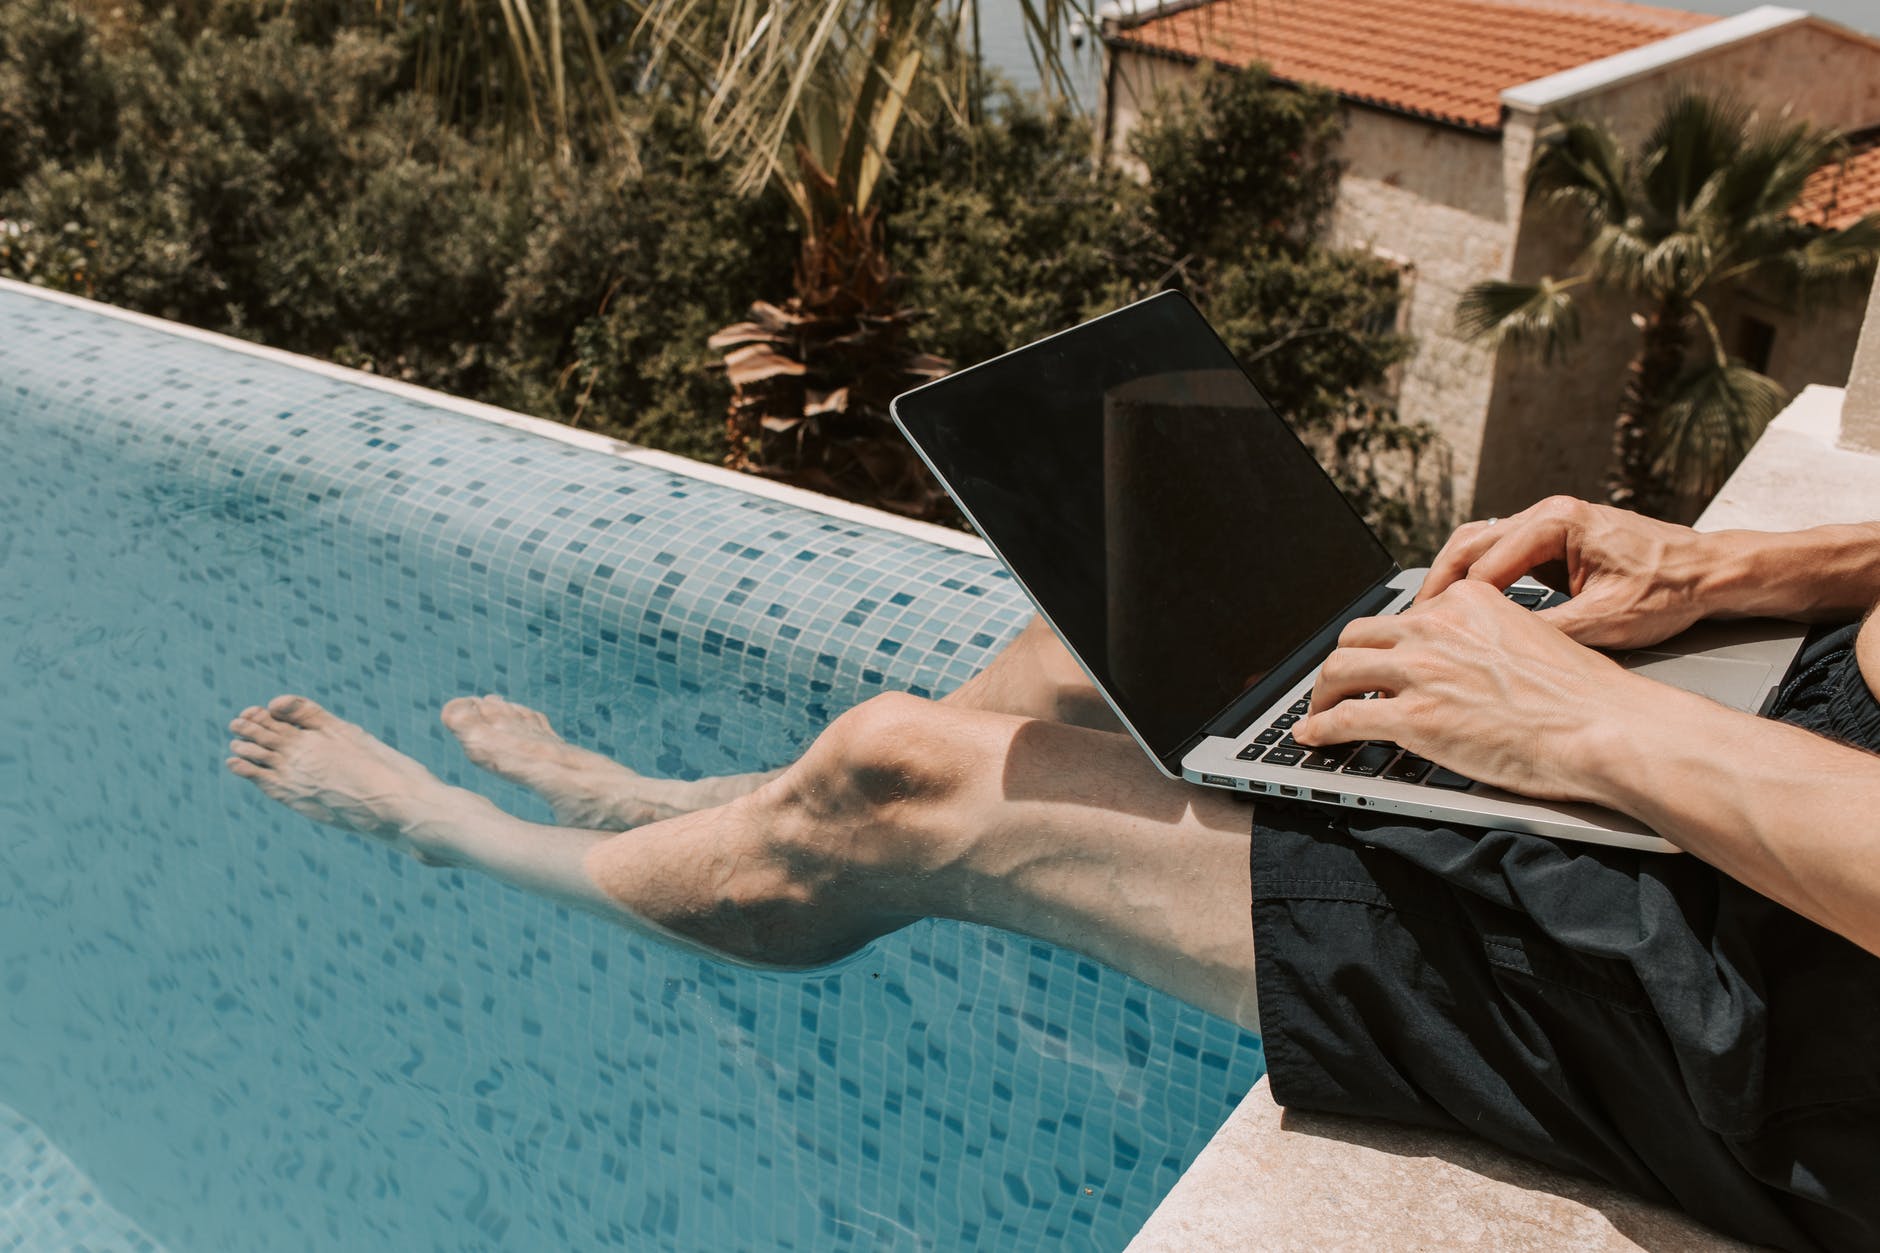 Brandon sat down by the pool and eavesdropped on his wife. | Source: Pexels